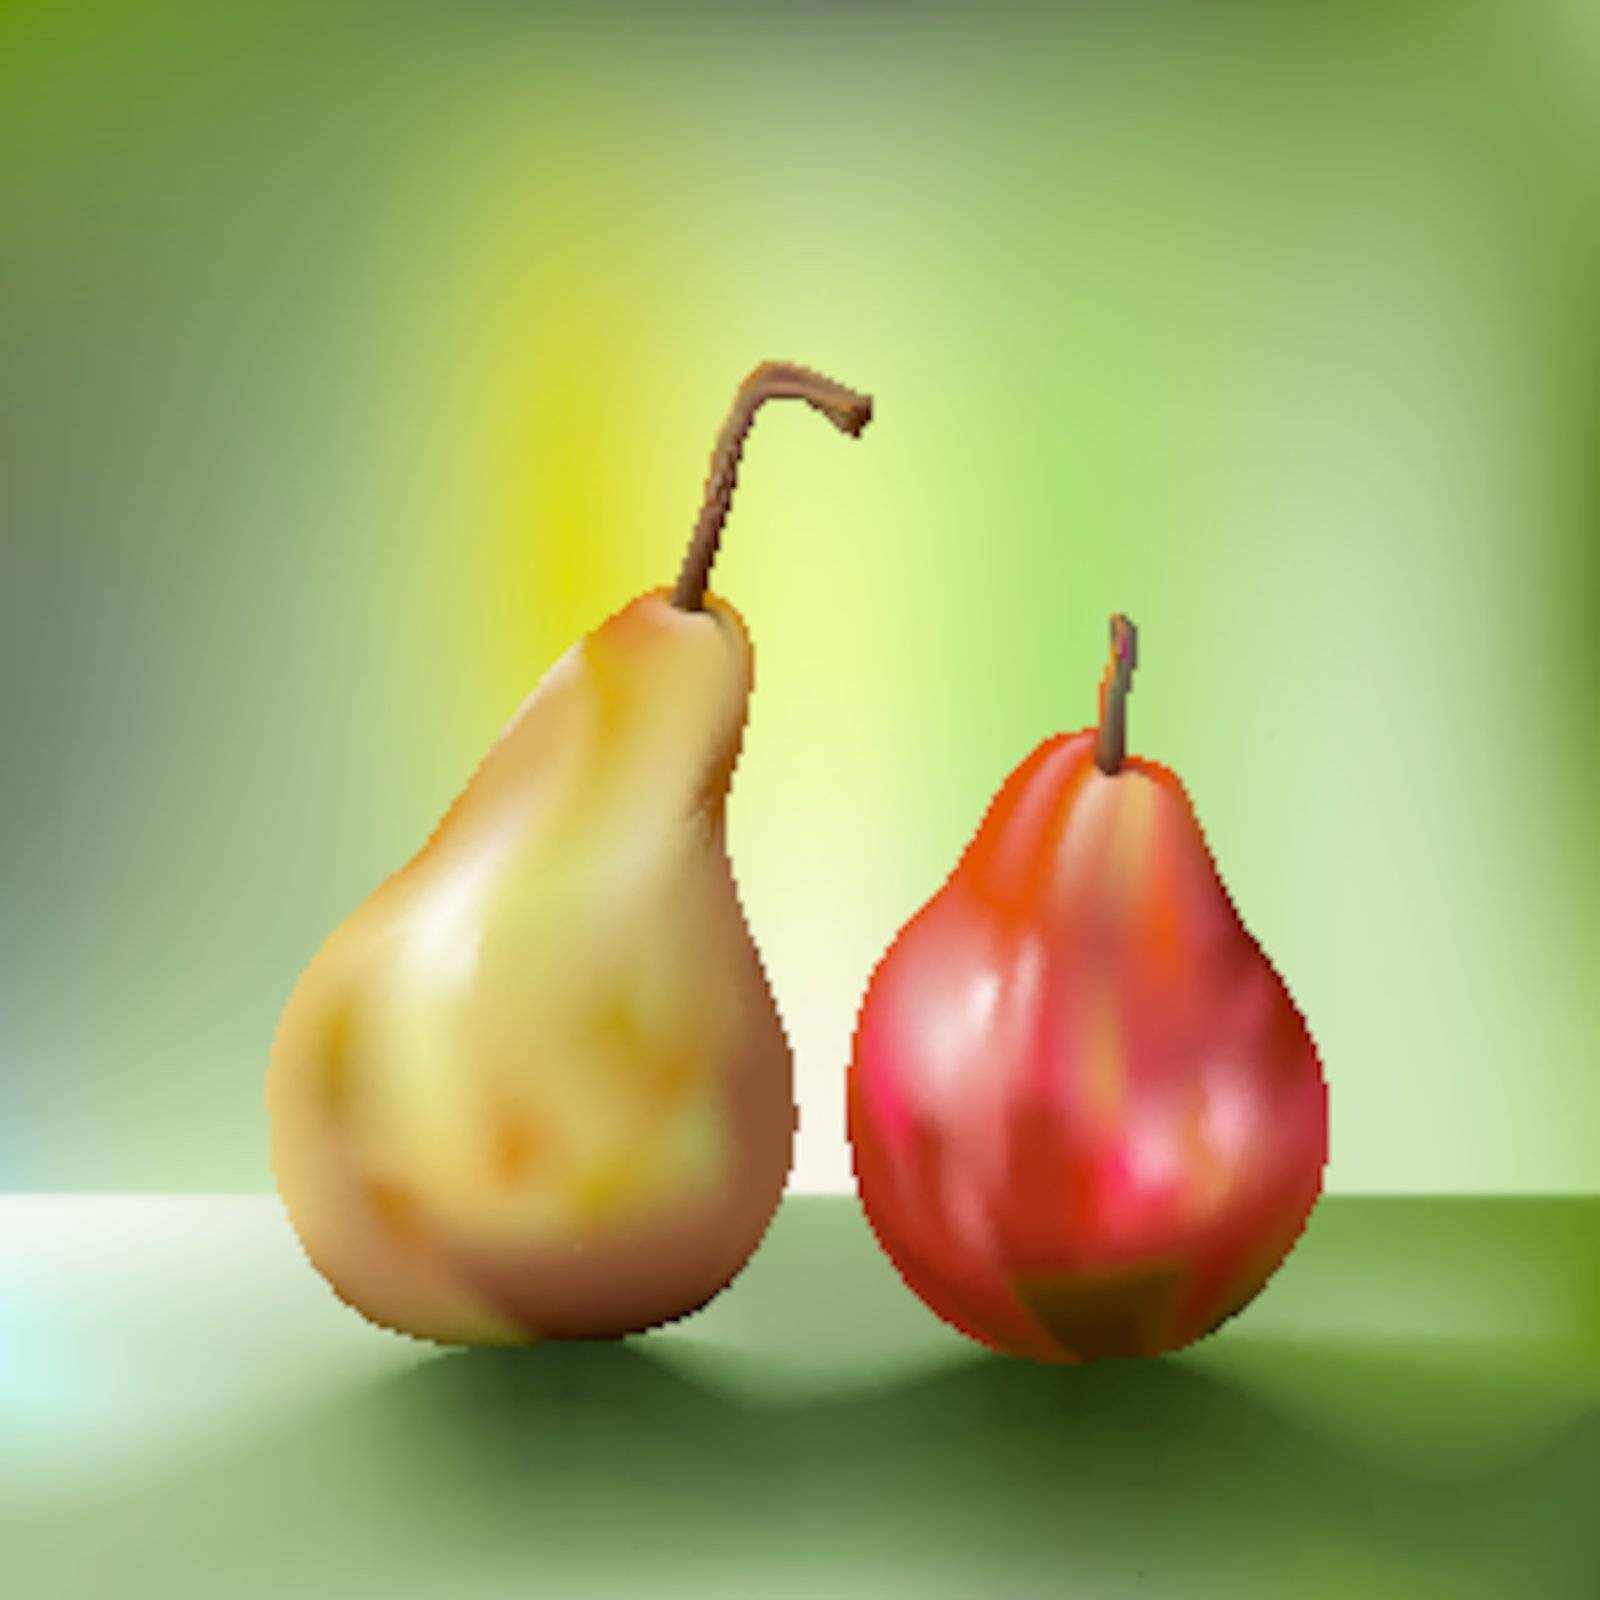 two pears side by side, created using gradient mesh